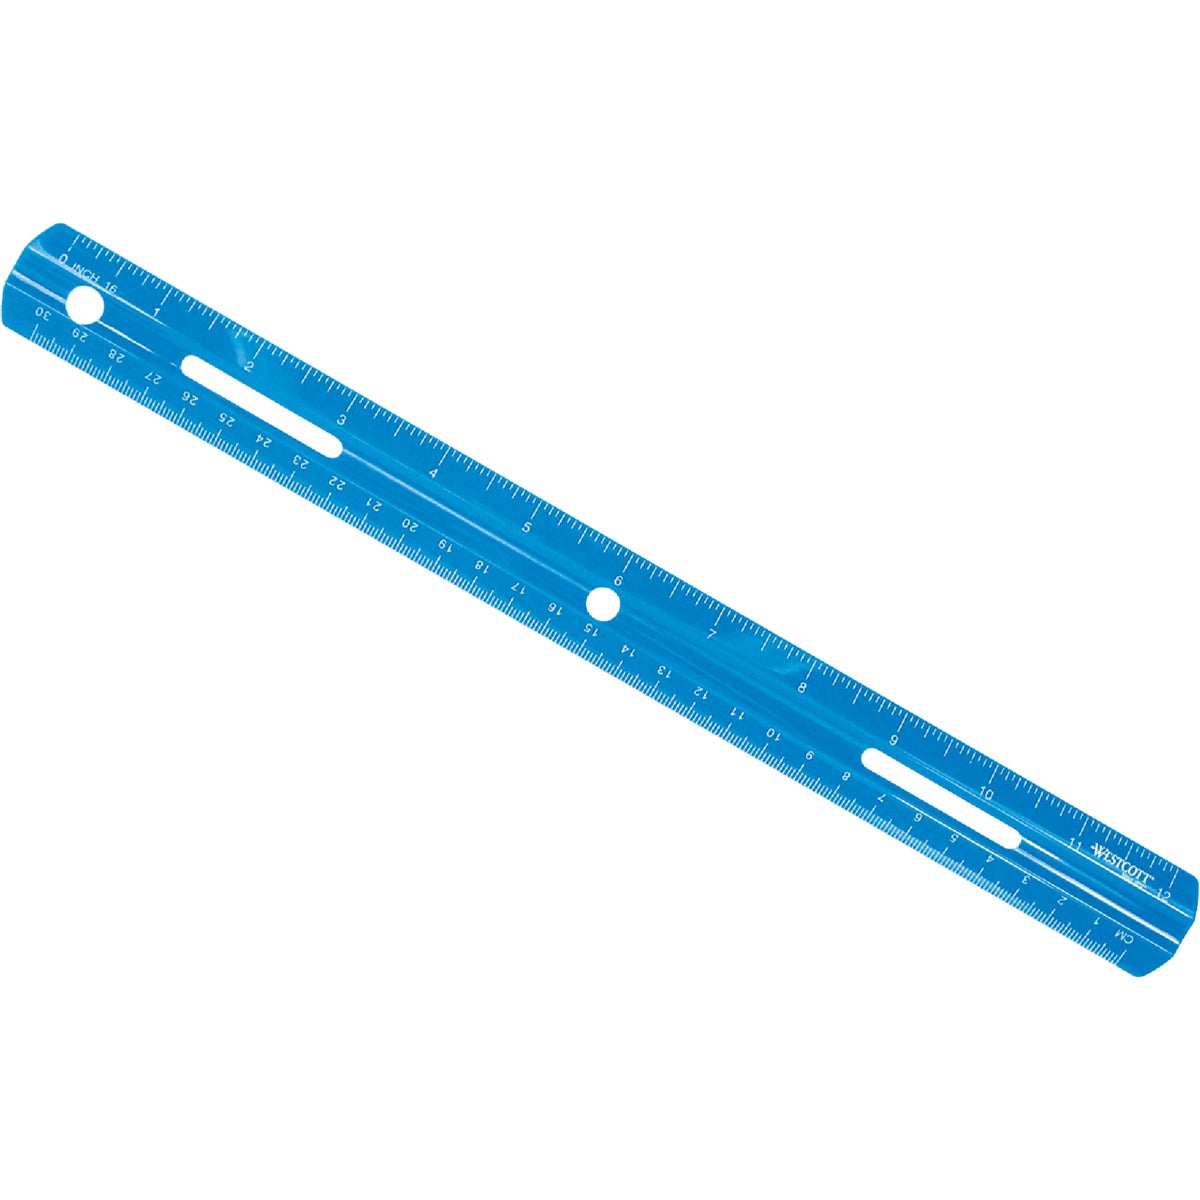 Item 973977, Grooved plastic ruler to hold pencil or pen. Holes to fit 3-ring binders.